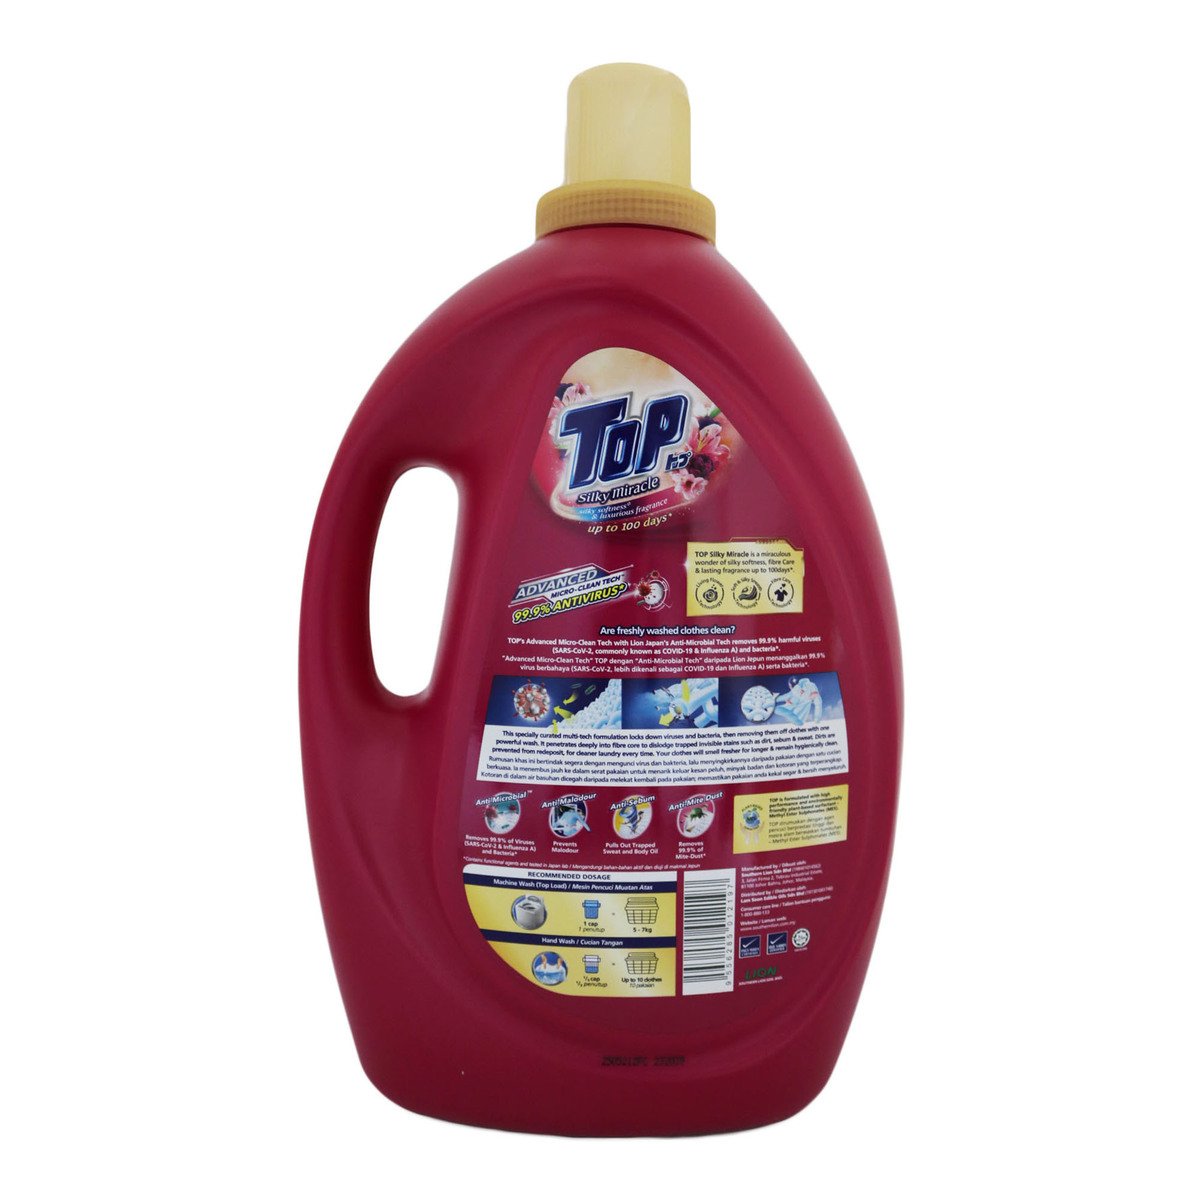 Top CLD Micro Clean Tech Silky Miracle 3.6Kg